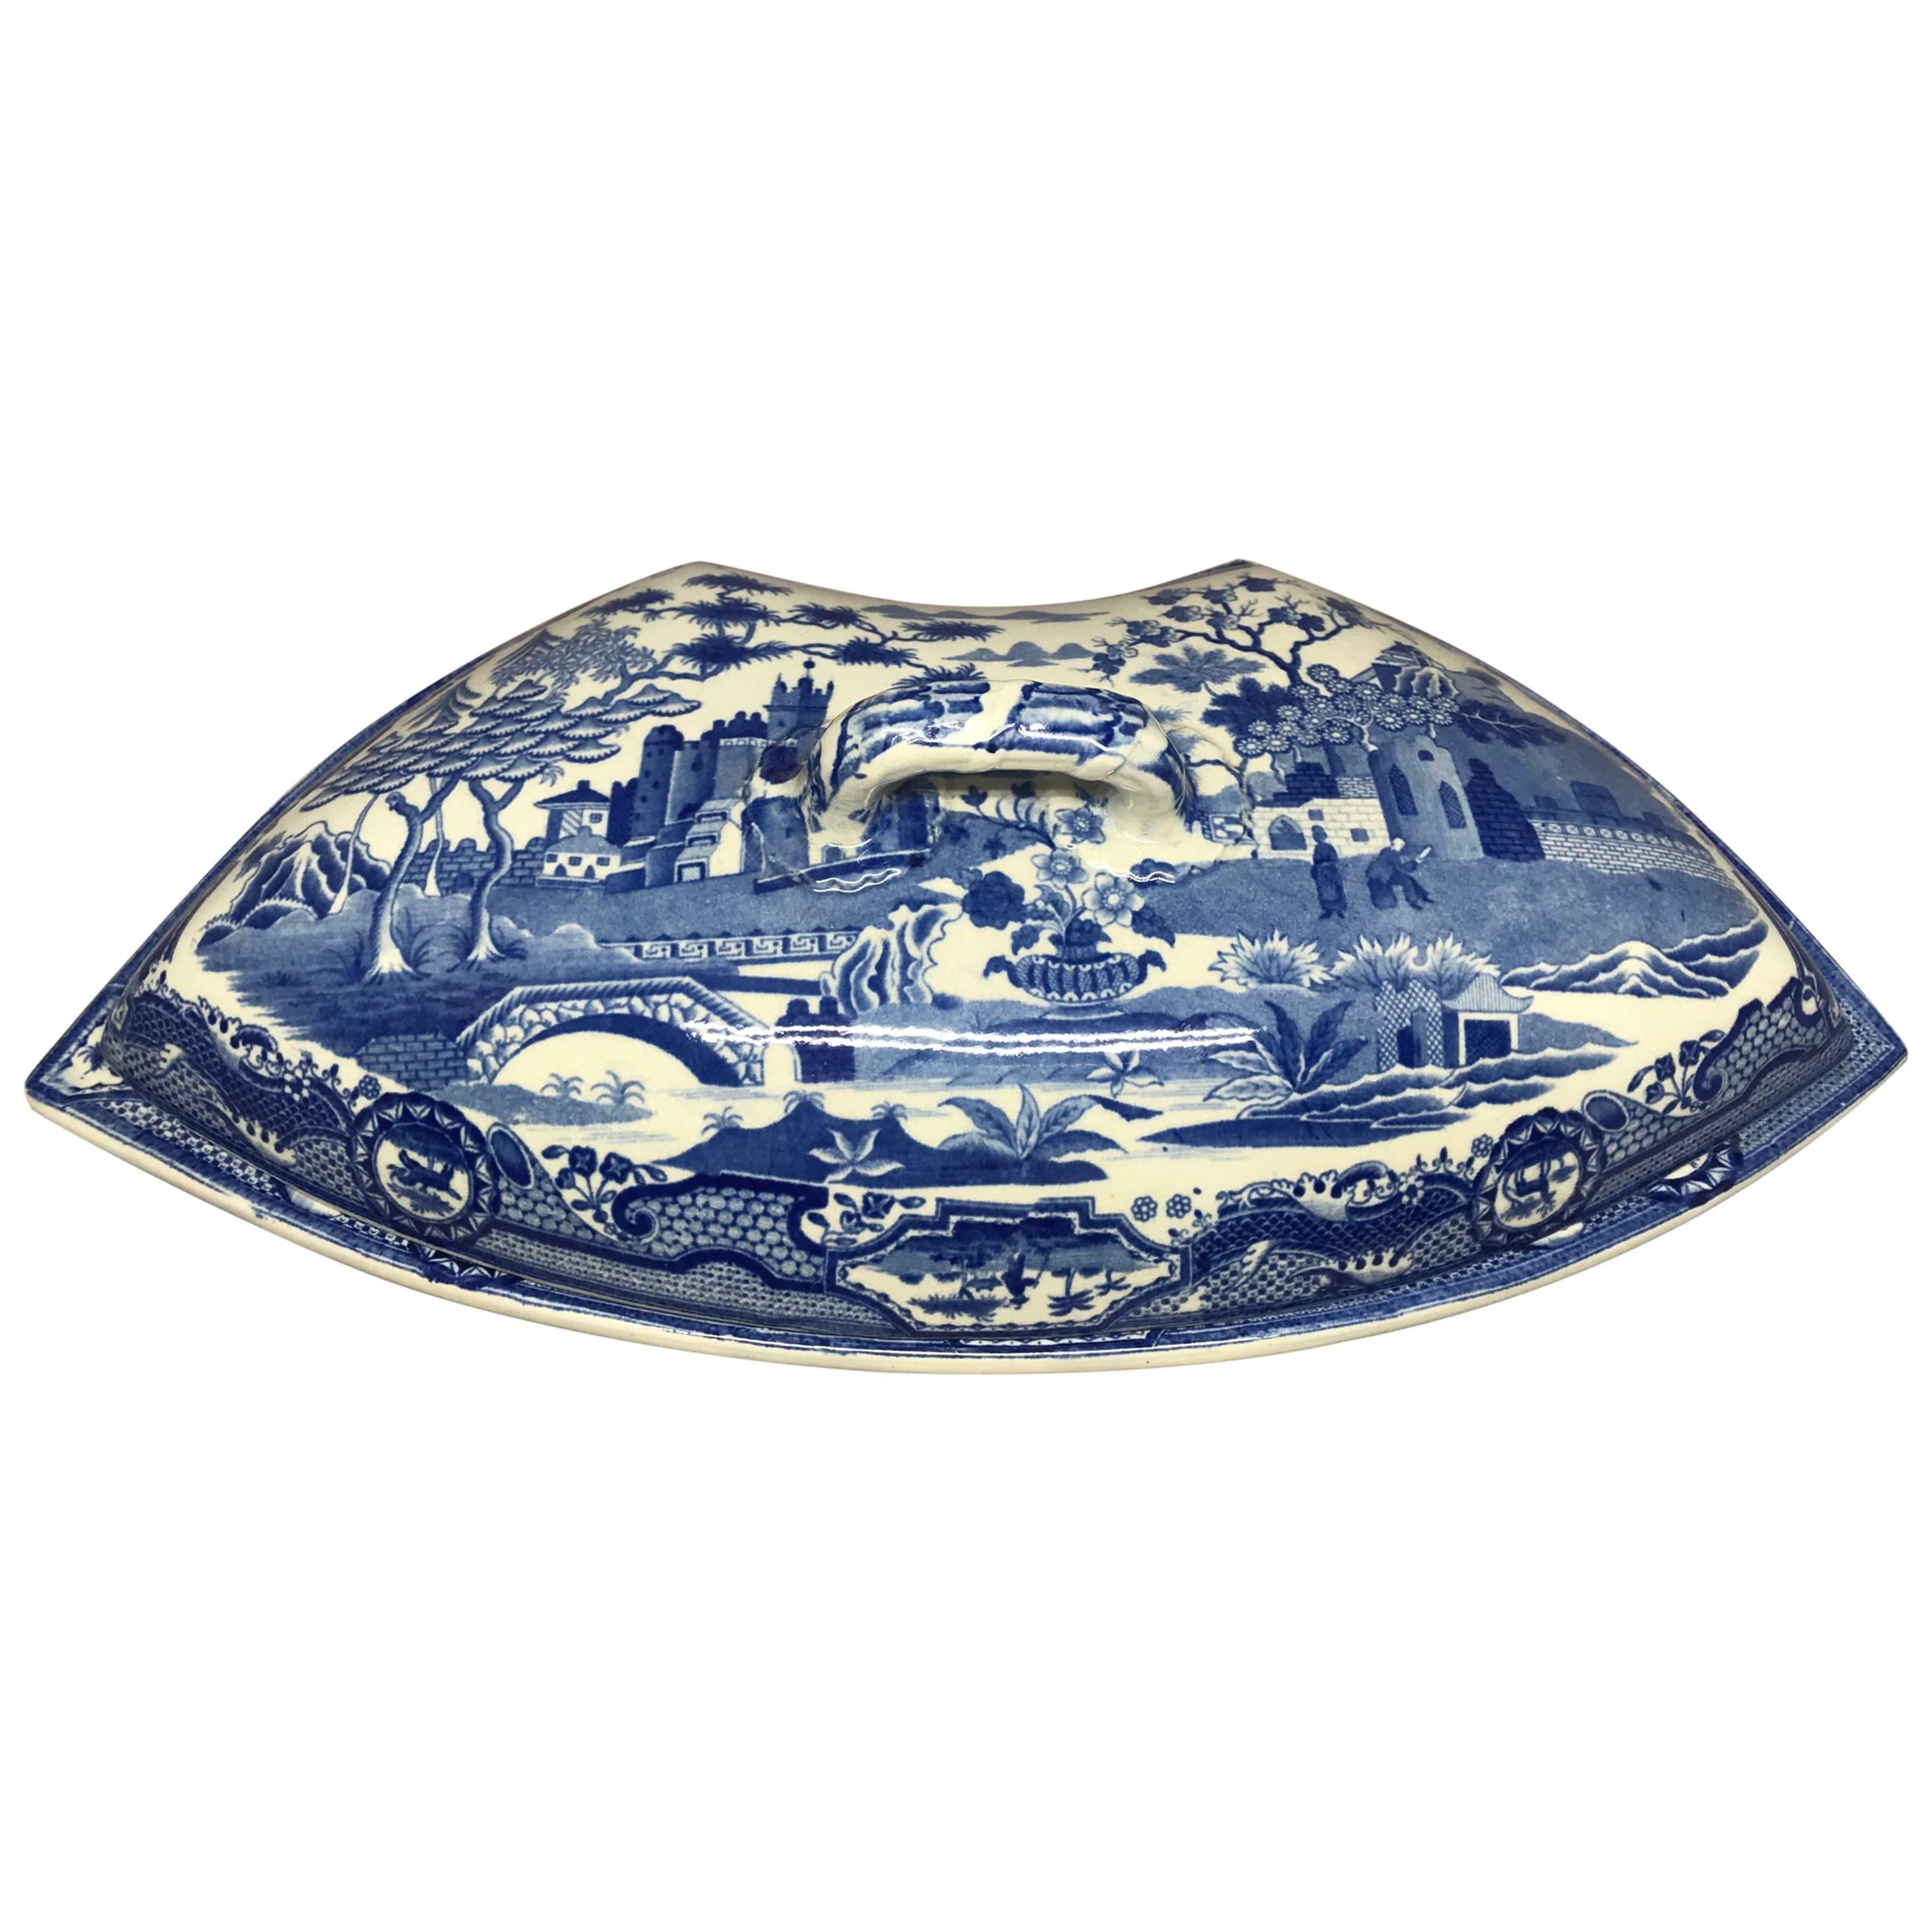  Blue and White Spode Chinoiserie Crescent Covered Dish